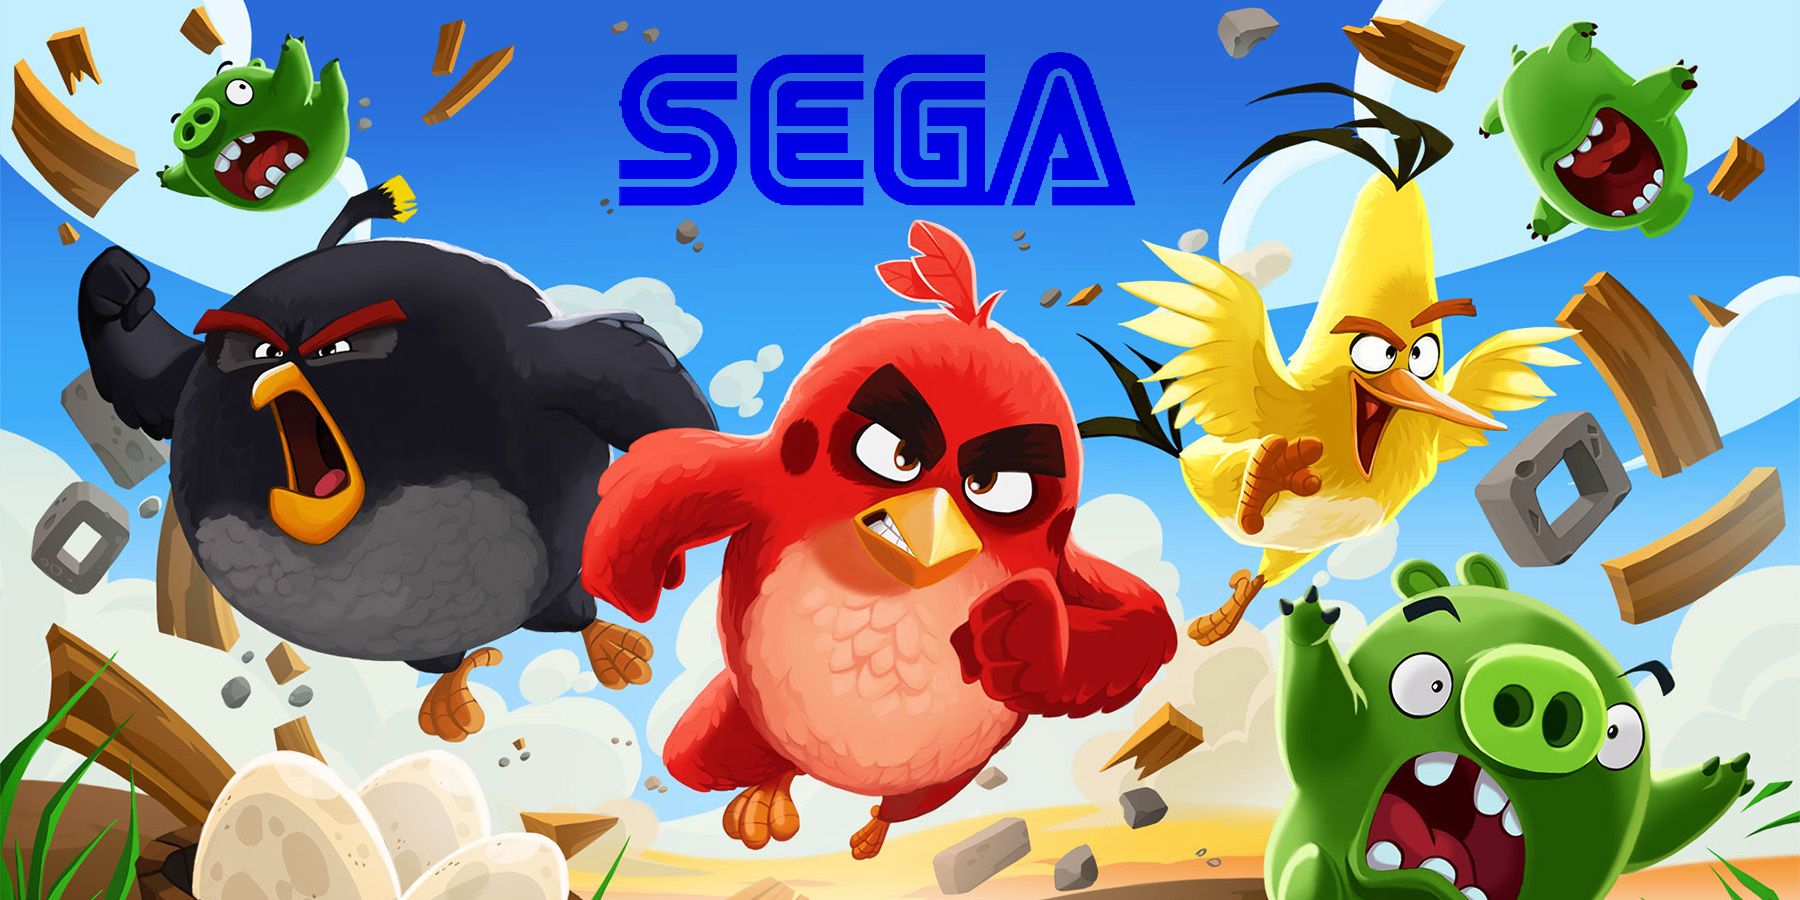 sega-now-owns-angry-birds